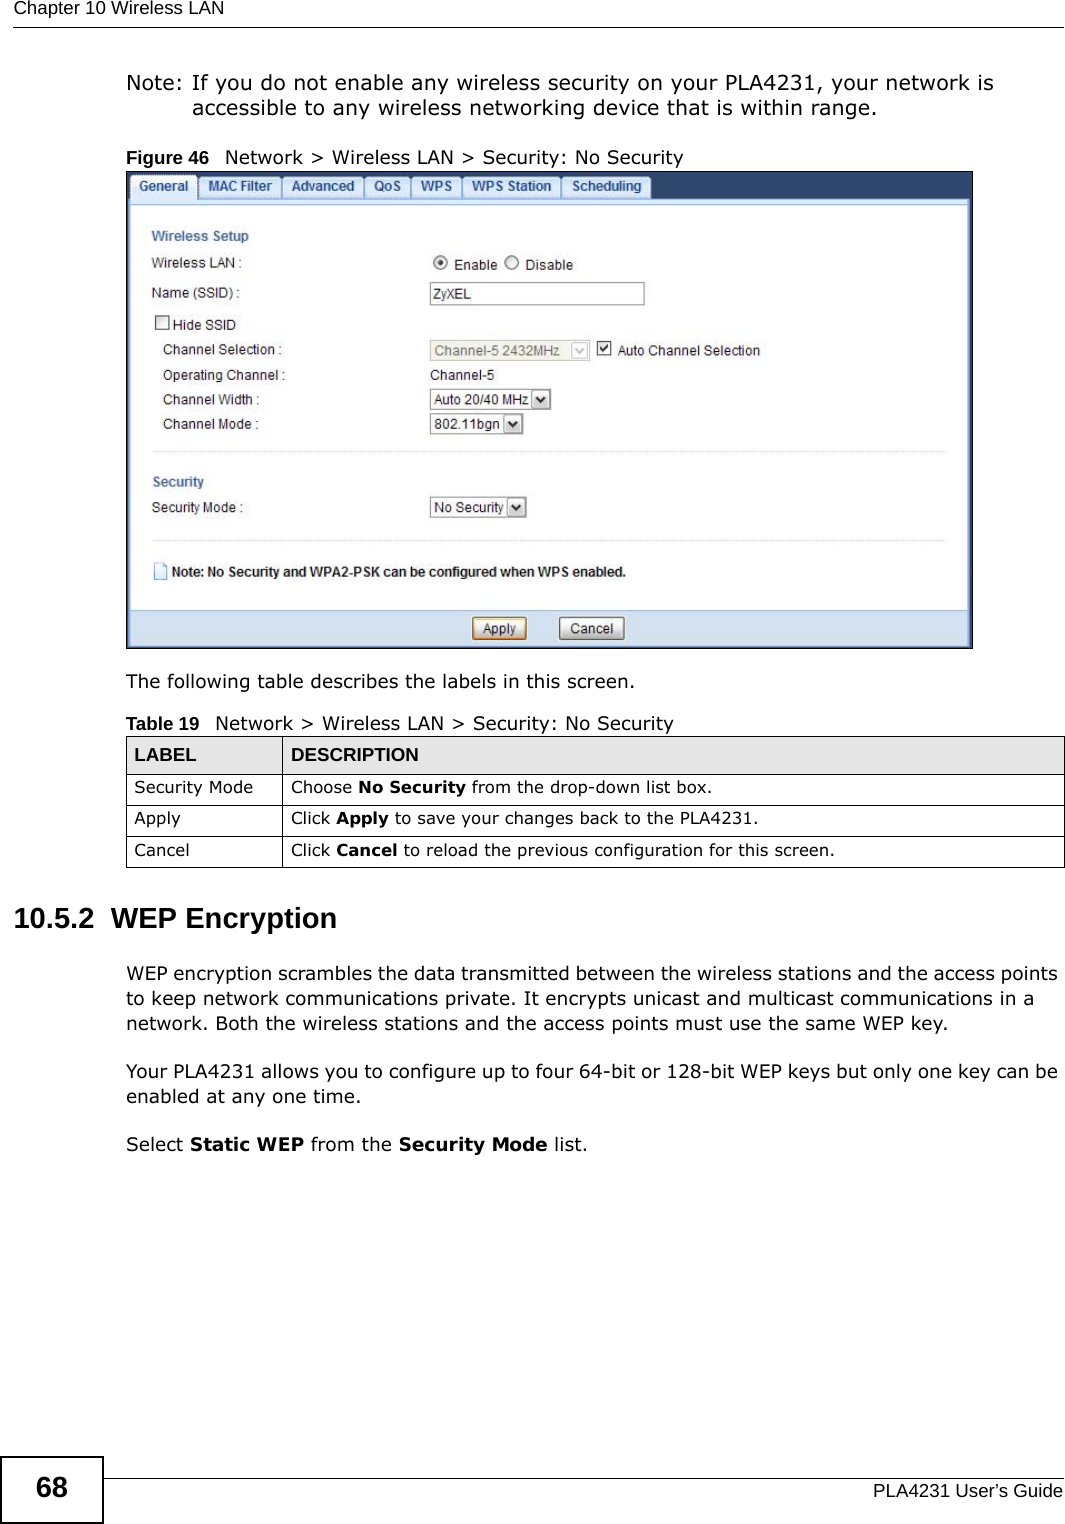 Chapter 10 Wireless LANPLA4231 User’s Guide68Note: If you do not enable any wireless security on your PLA4231, your network is accessible to any wireless networking device that is within range.Figure 46   Network &gt; Wireless LAN &gt; Security: No SecurityThe following table describes the labels in this screen.10.5.2  WEP EncryptionWEP encryption scrambles the data transmitted between the wireless stations and the access points to keep network communications private. It encrypts unicast and multicast communications in a network. Both the wireless stations and the access points must use the same WEP key.Your PLA4231 allows you to configure up to four 64-bit or 128-bit WEP keys but only one key can be enabled at any one time.Select Static WEP from the Security Mode list.Table 19   Network &gt; Wireless LAN &gt; Security: No SecurityLABEL DESCRIPTIONSecurity Mode Choose No Security from the drop-down list box.Apply Click Apply to save your changes back to the PLA4231.Cancel Click Cancel to reload the previous configuration for this screen.